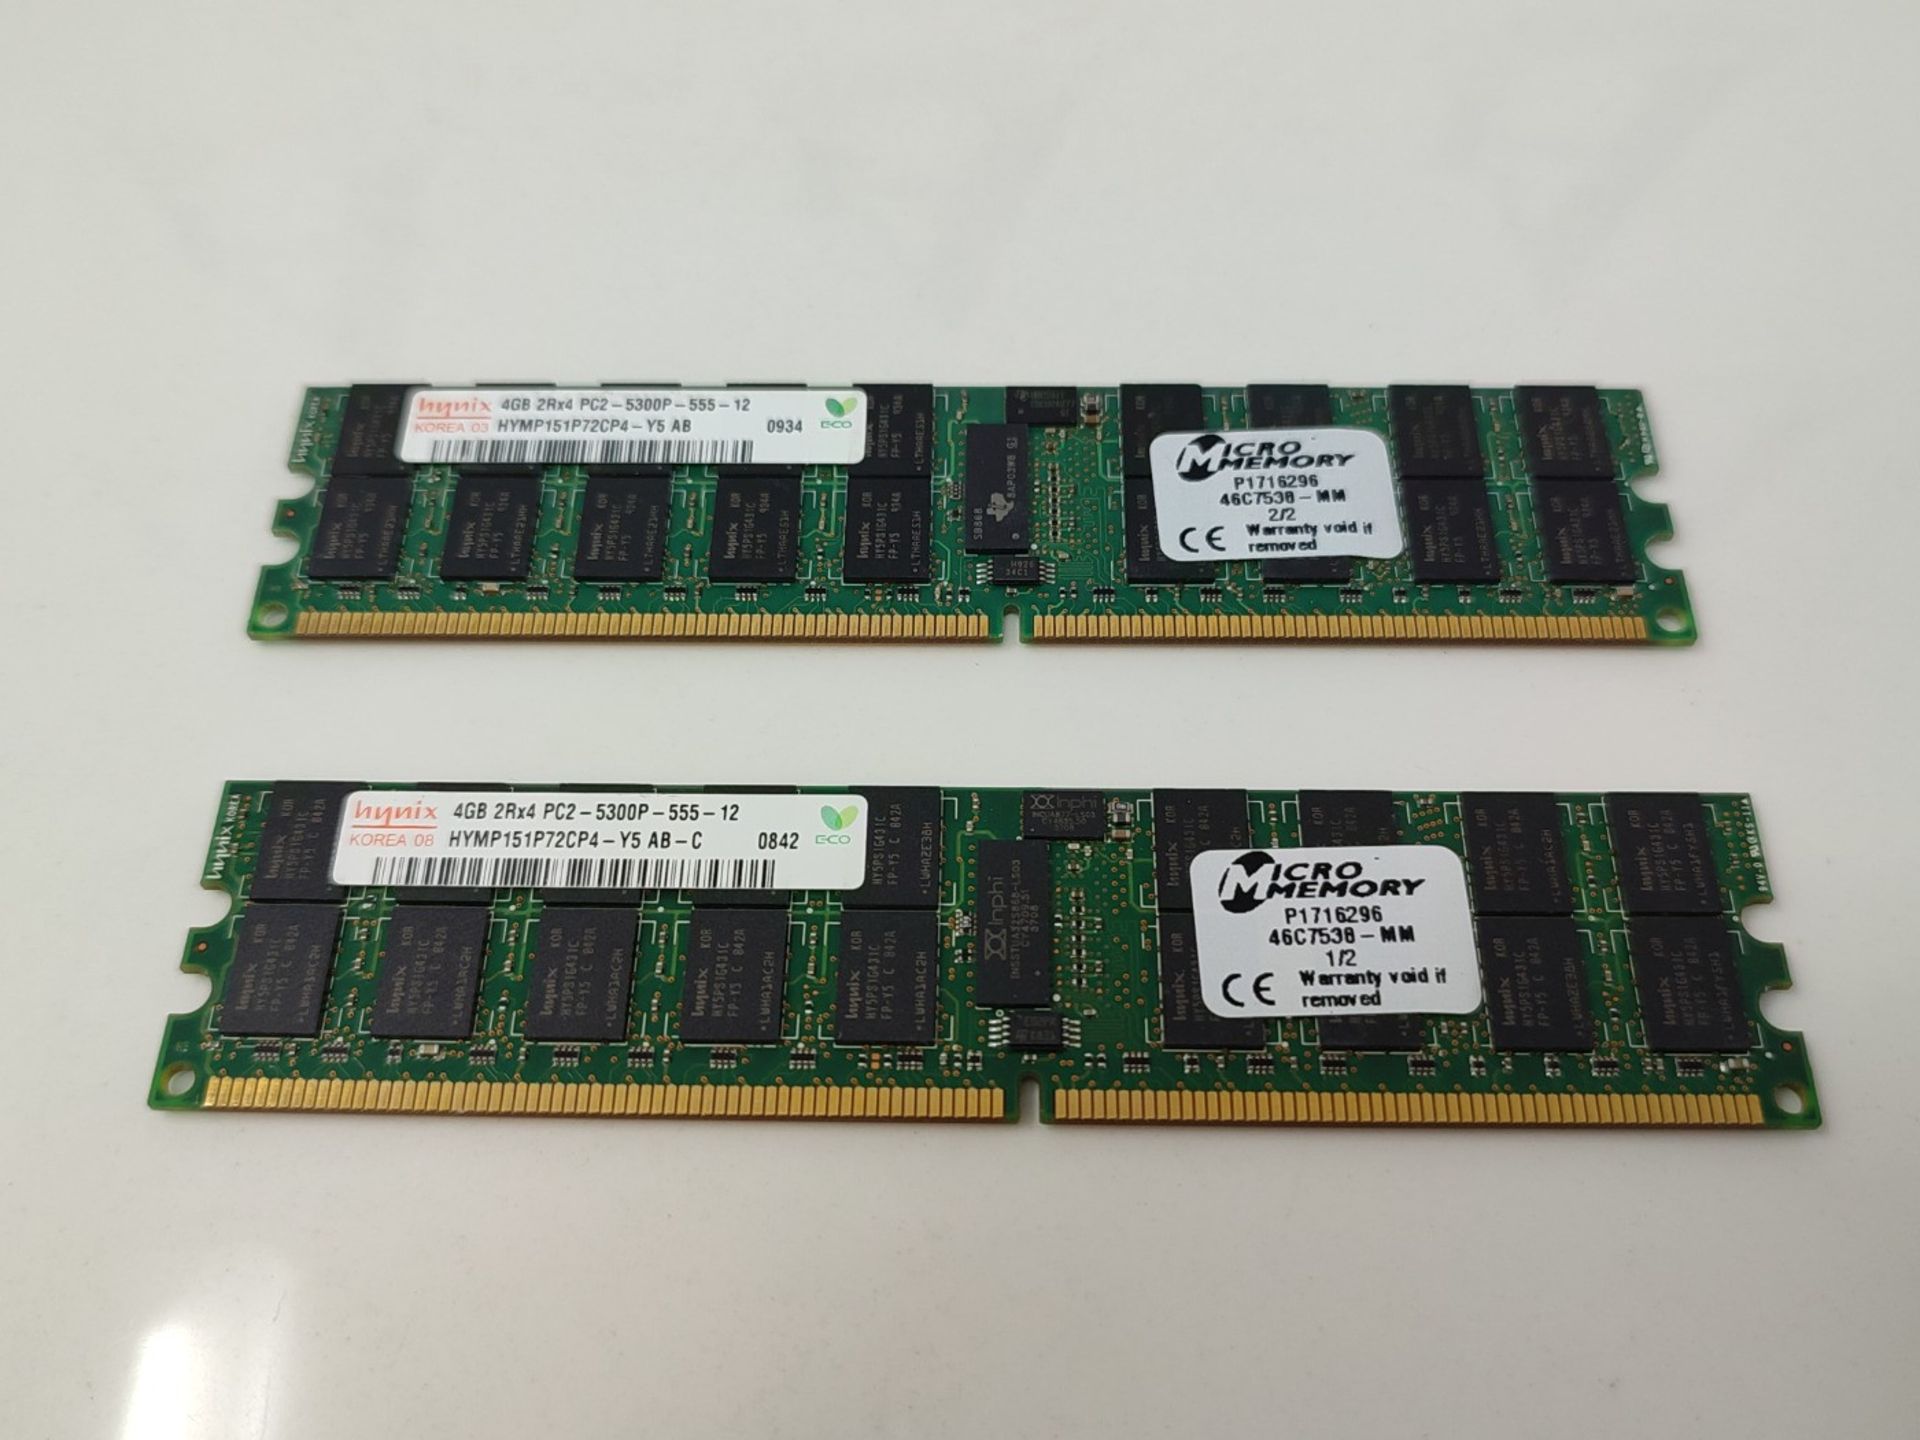 MicroMemory 8GB DDR2 667MHz Memory Module - Image 2 of 3